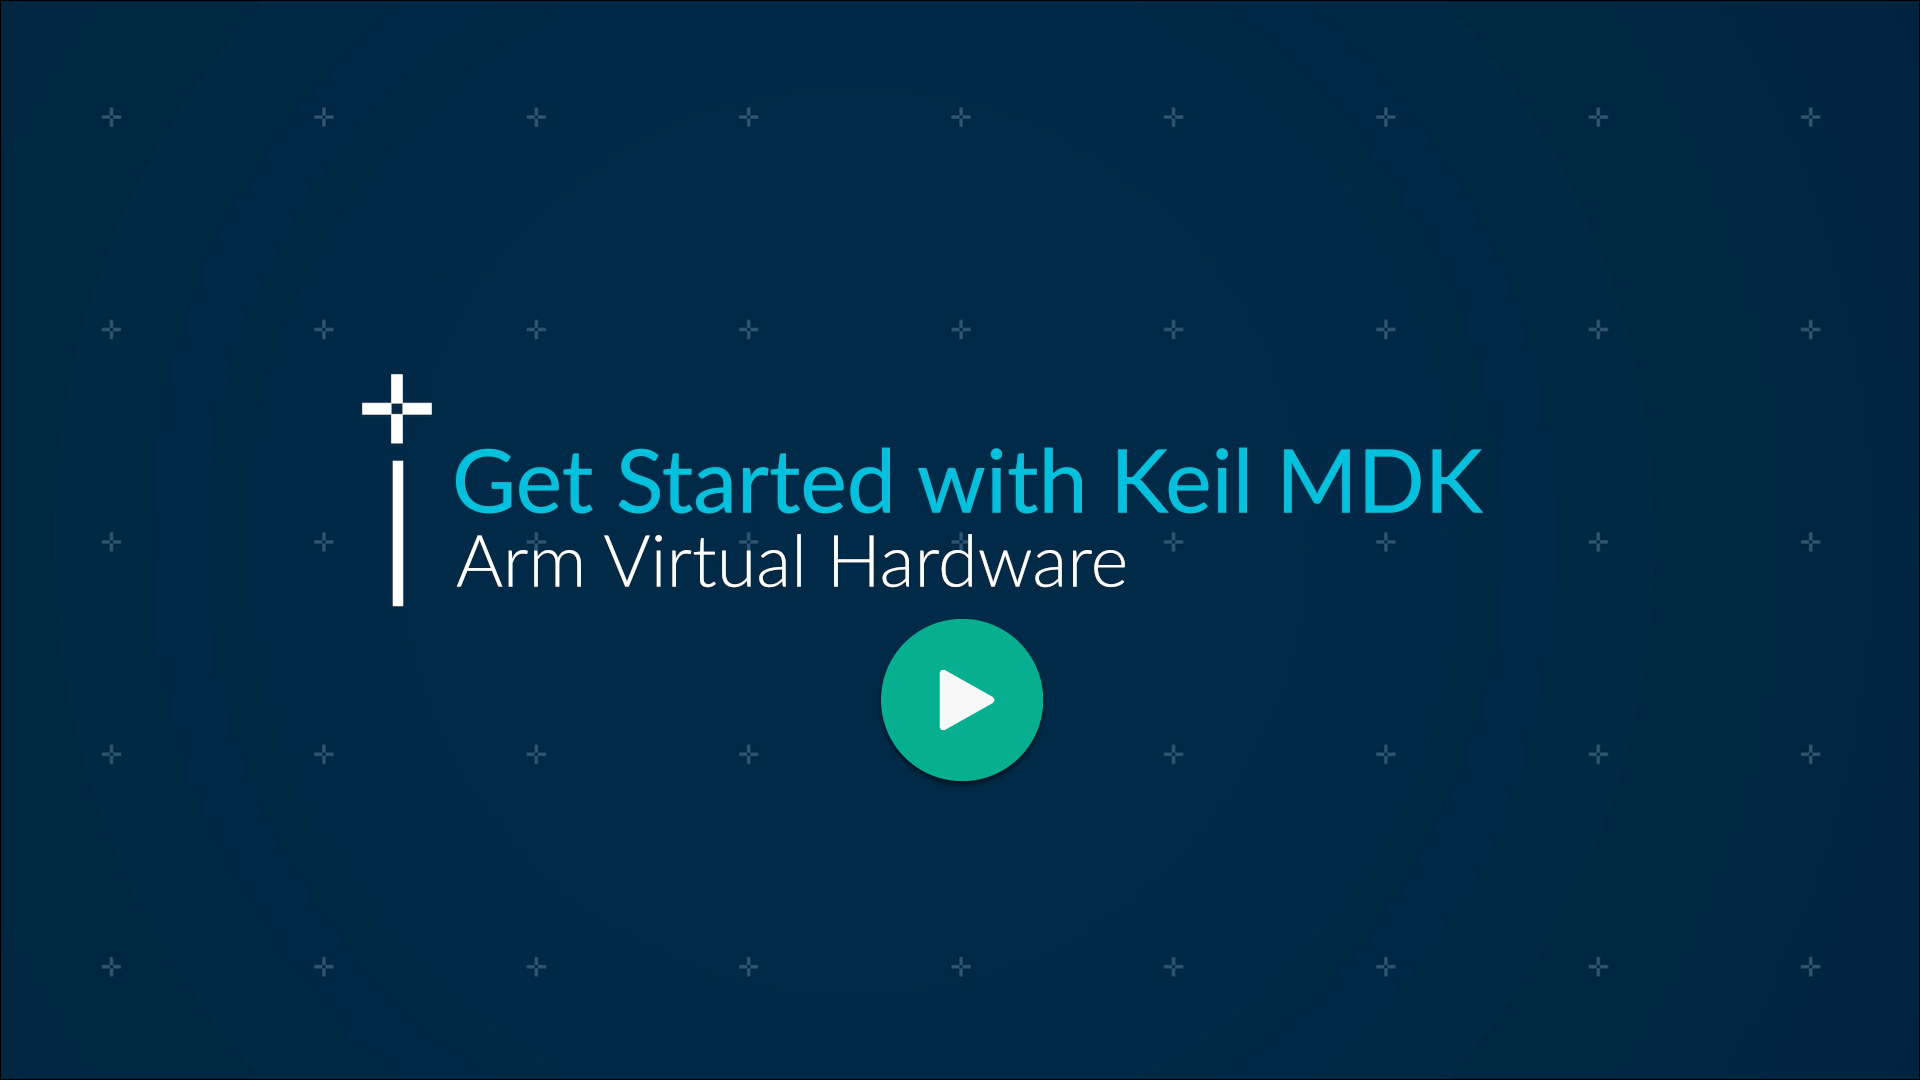 Arm Virtual Hardware: Get Started with MDK